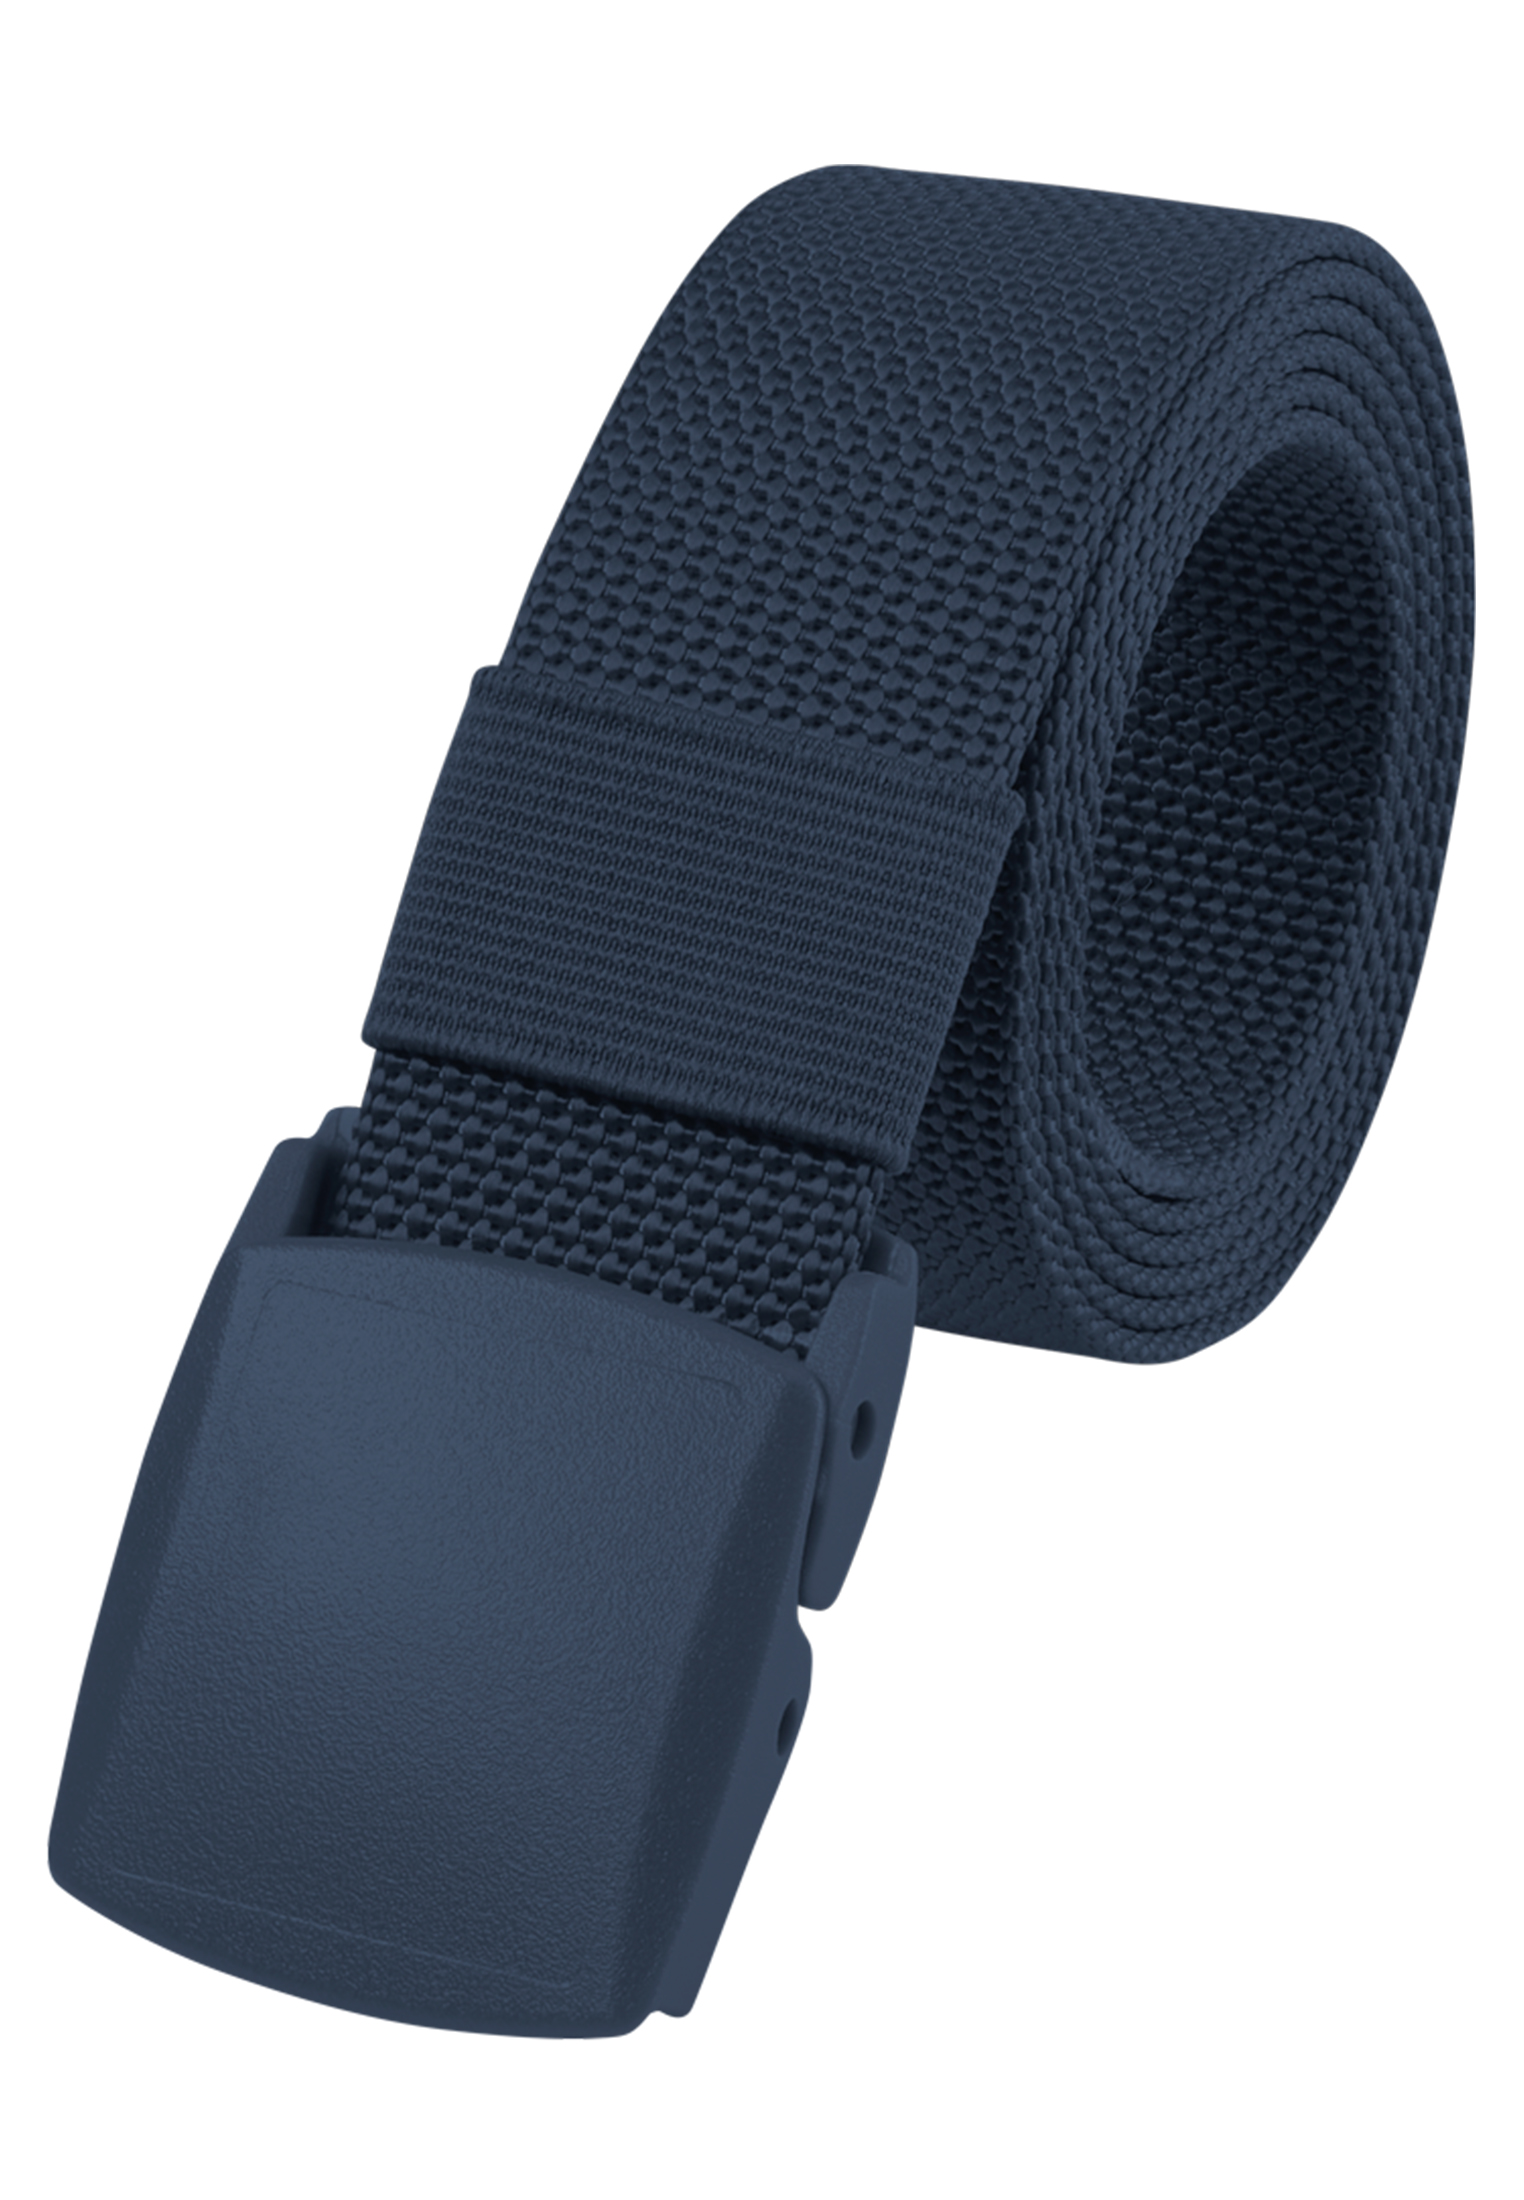 Accessoires Belt fast closure in Farbe navy